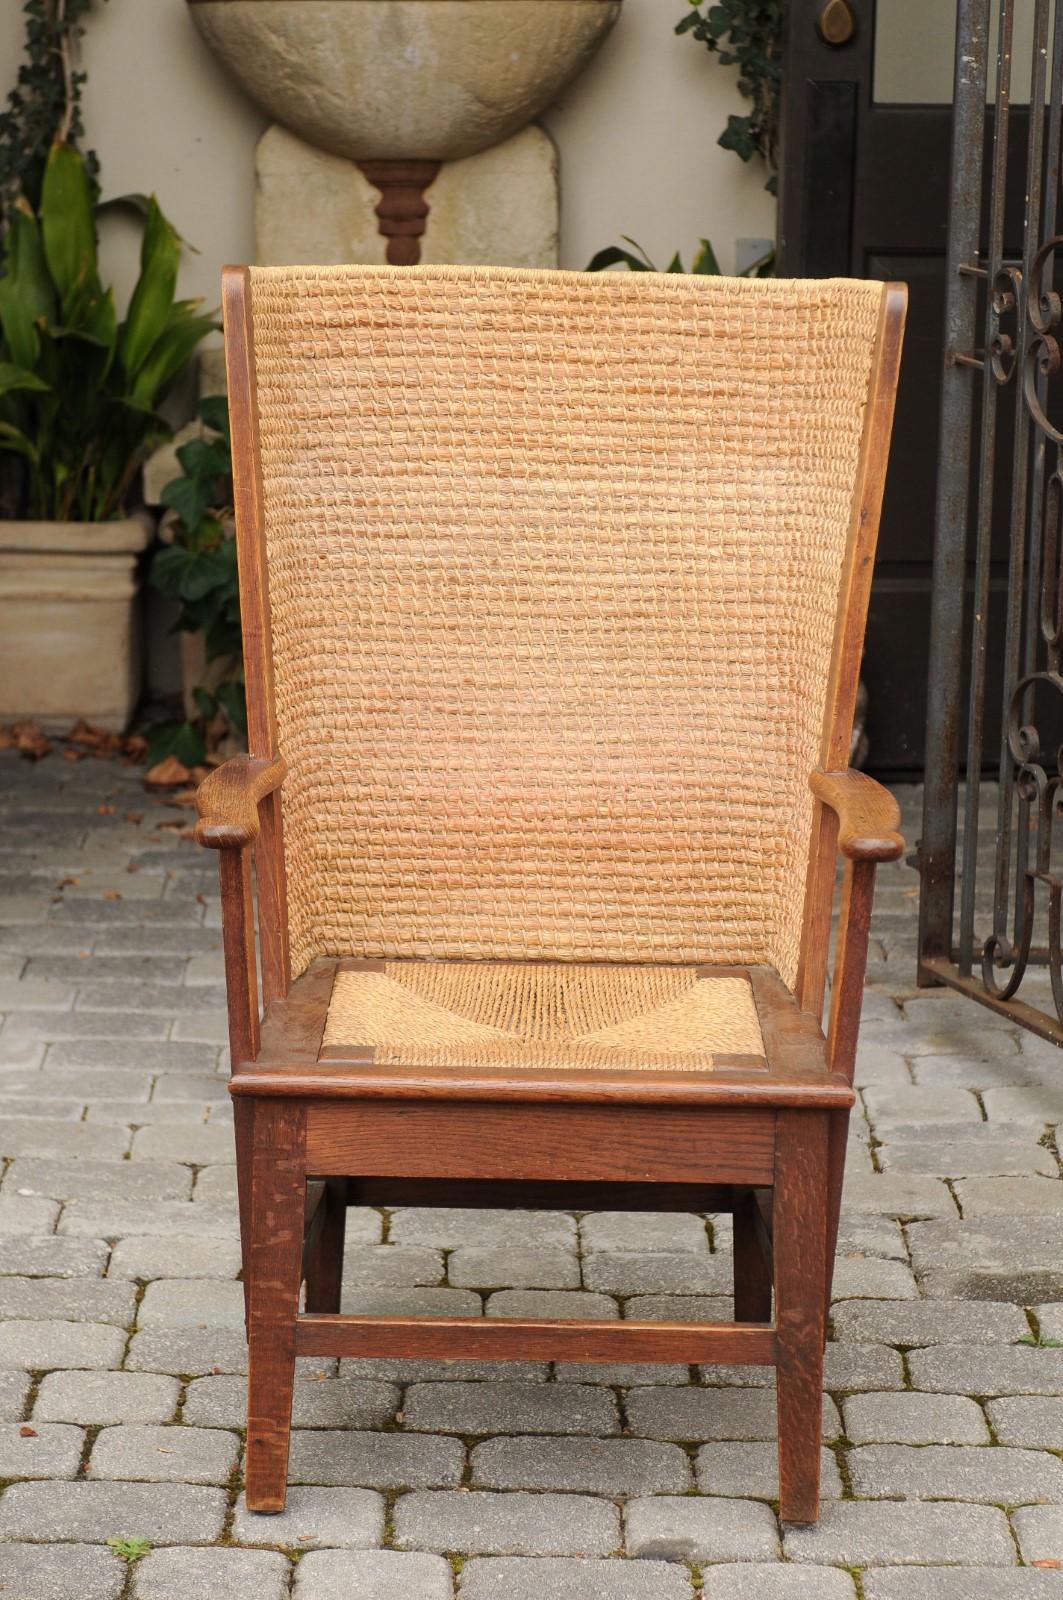 A Scottish Orkney Island oak wingback chair from the late 19th century, with handwoven straw back, rush seat, open arms, straight legs and side stretchers. Born in the archipelago of Orkney off of the northern coast of Scotland, this chair features